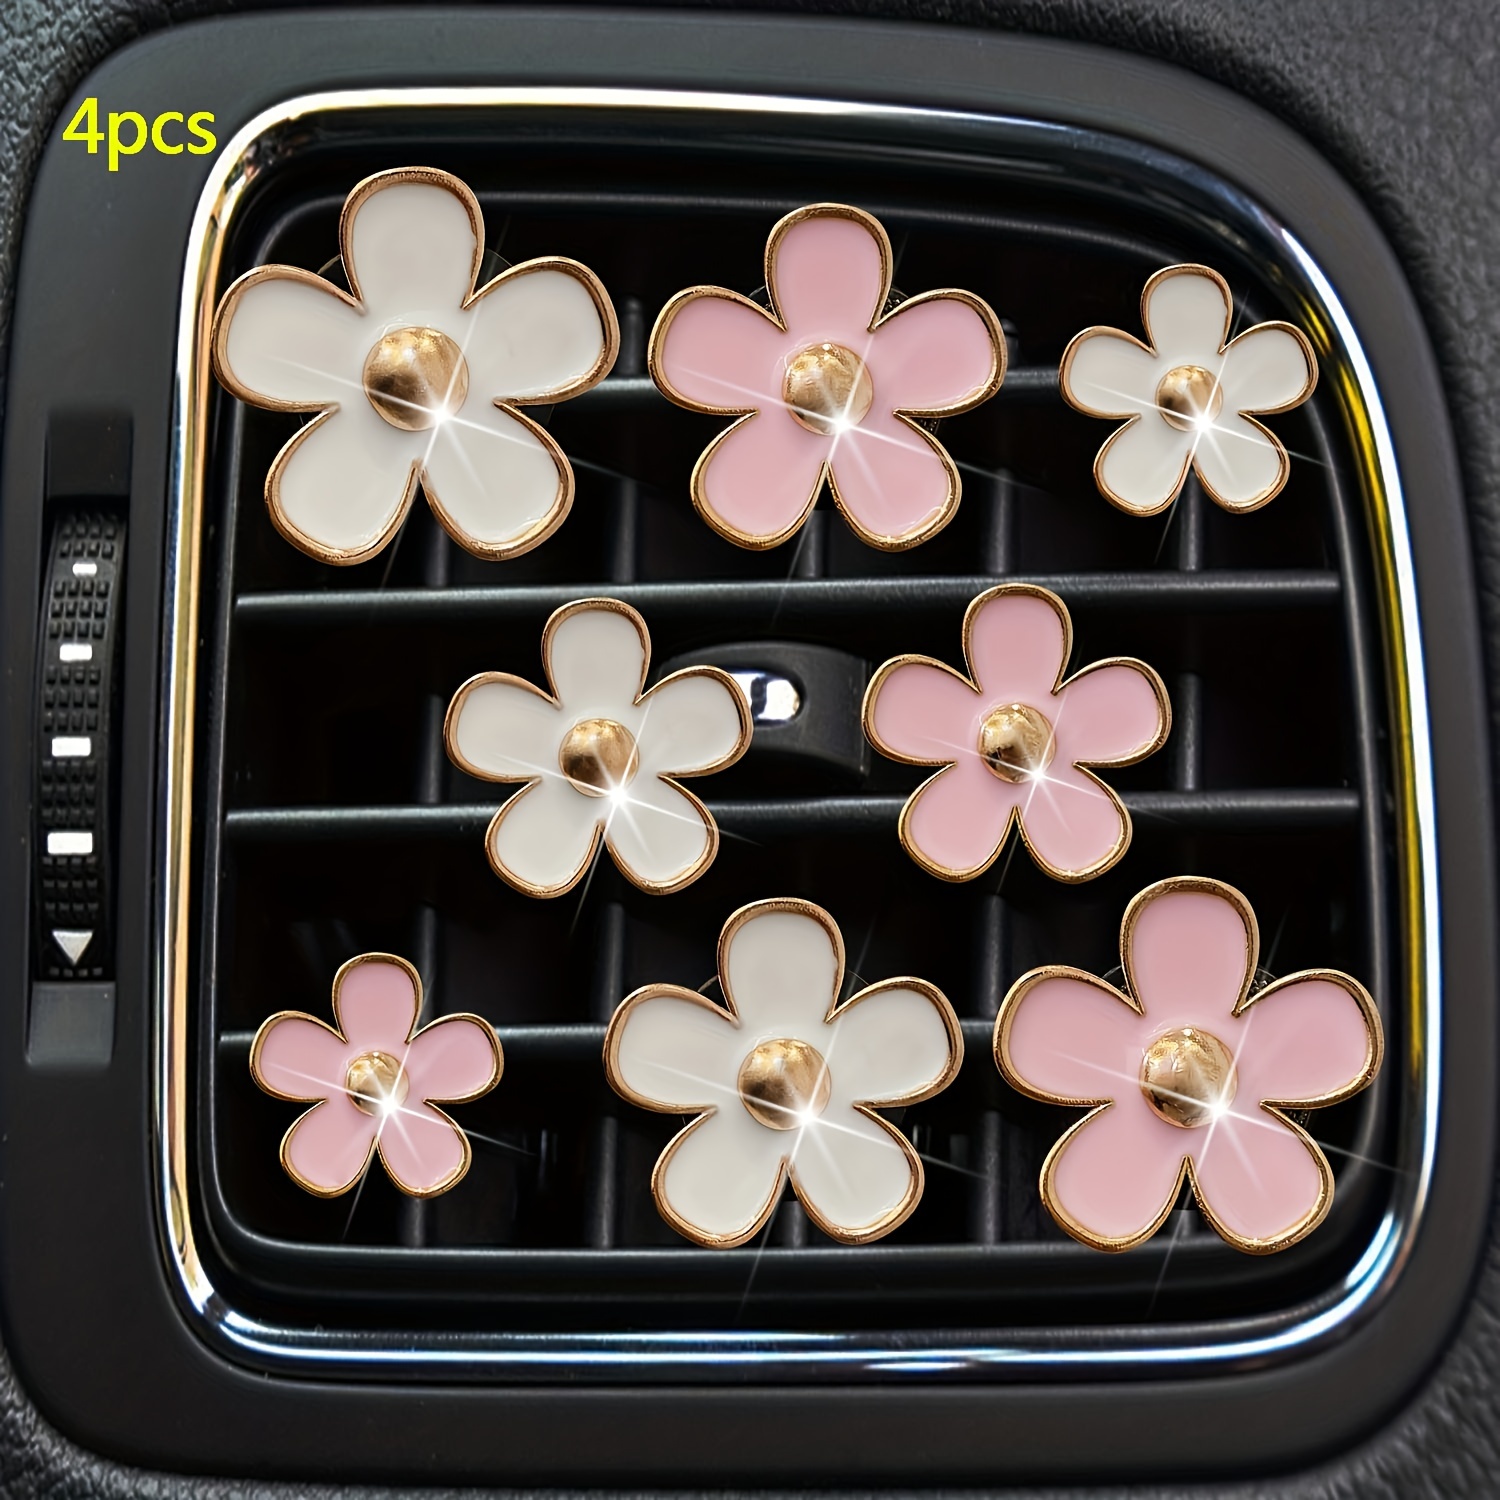 Adorable Auto Accents: Discover the Best Cute Car Accessories